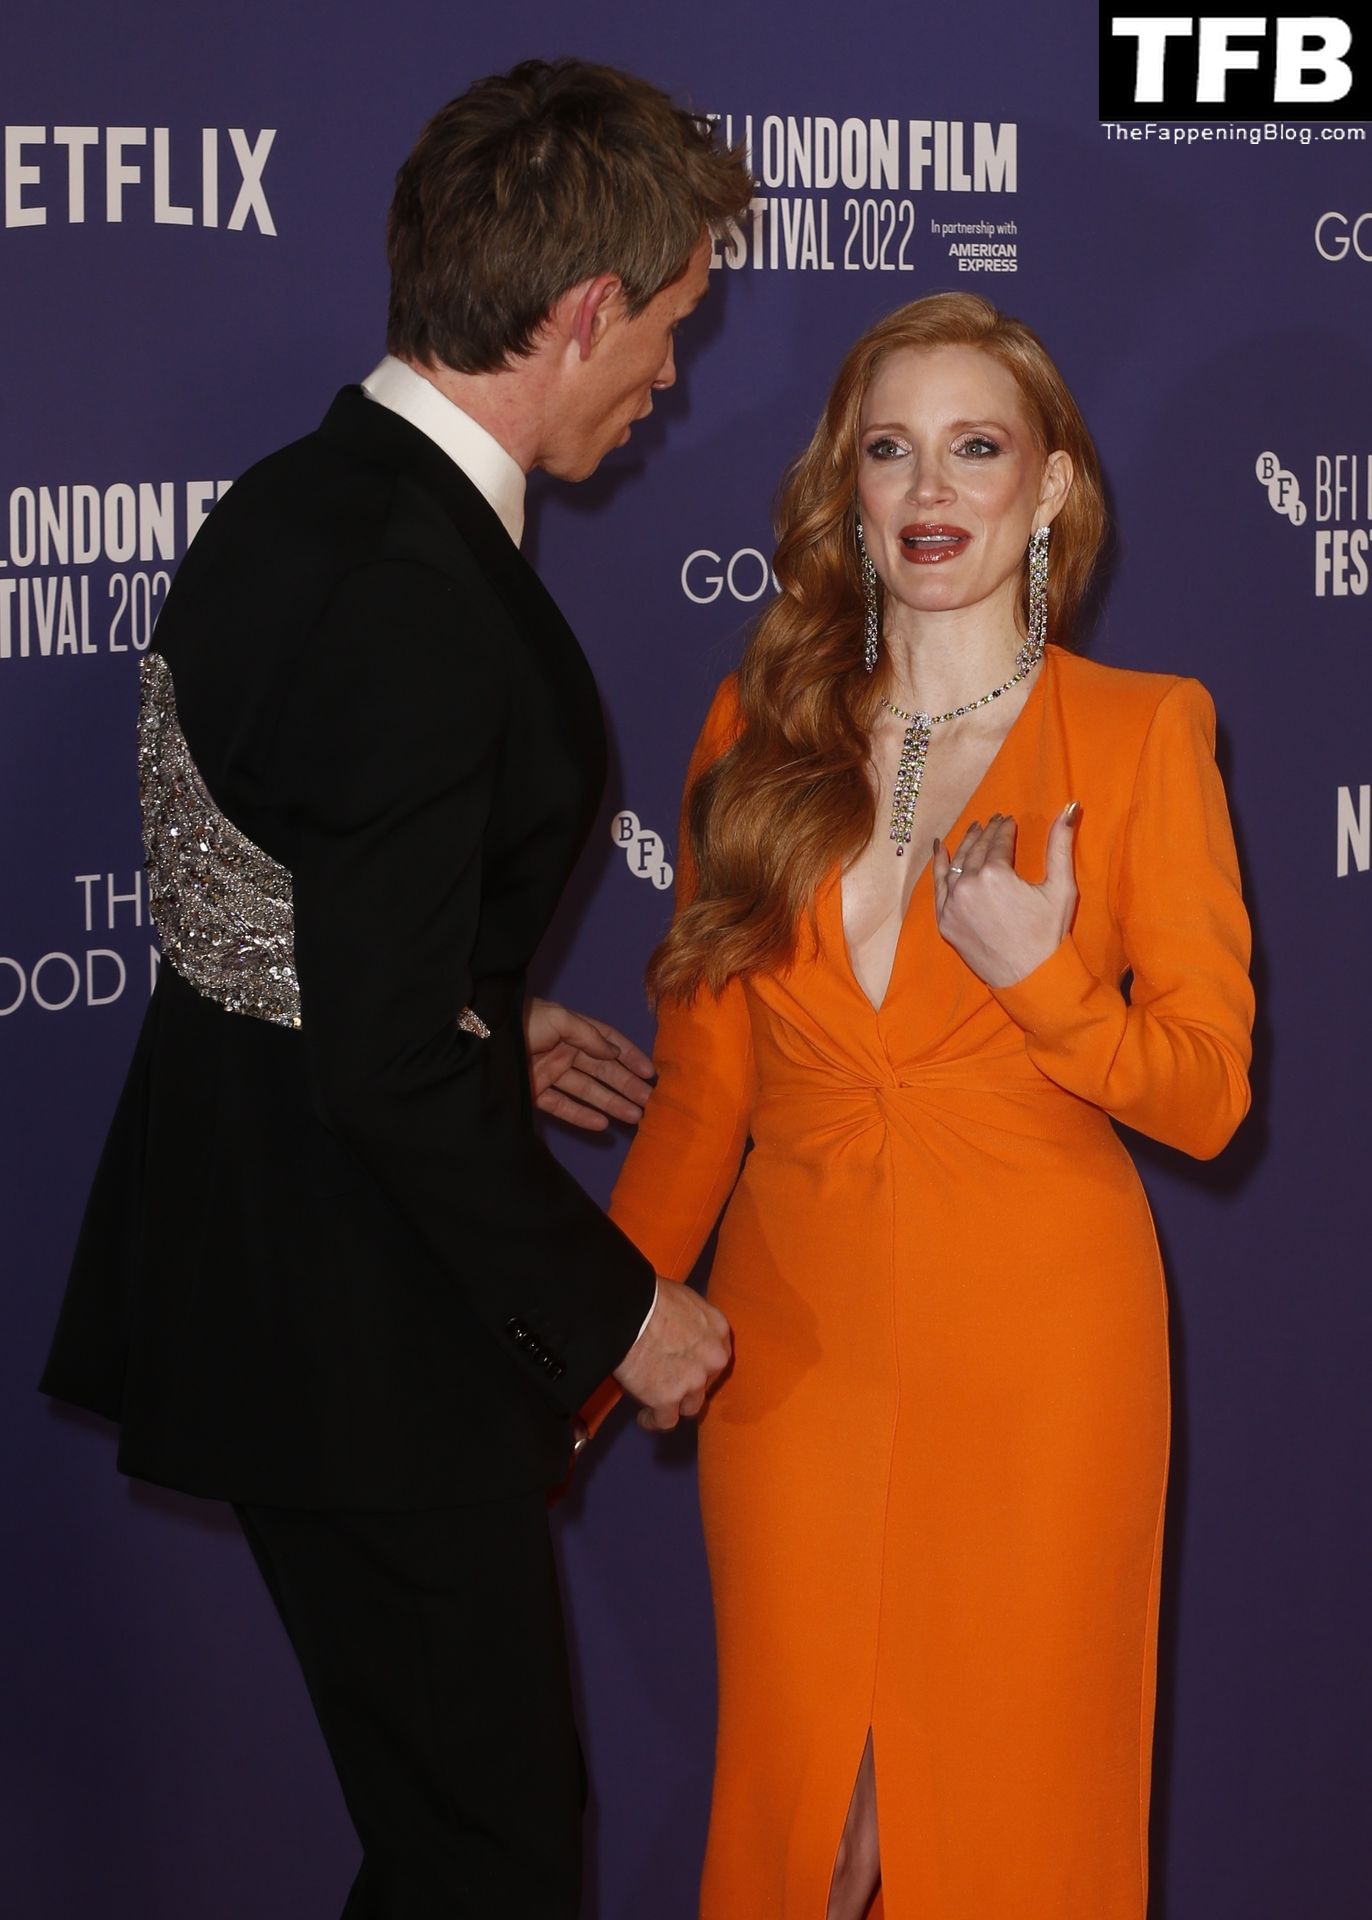 Jessica Chastain Sexy The Fappening Blog 60 - Jessica Chastain Poses for Photographers Upon Arrival for the Premiere of the Film “The Good Nurse” in London (150 Photos)